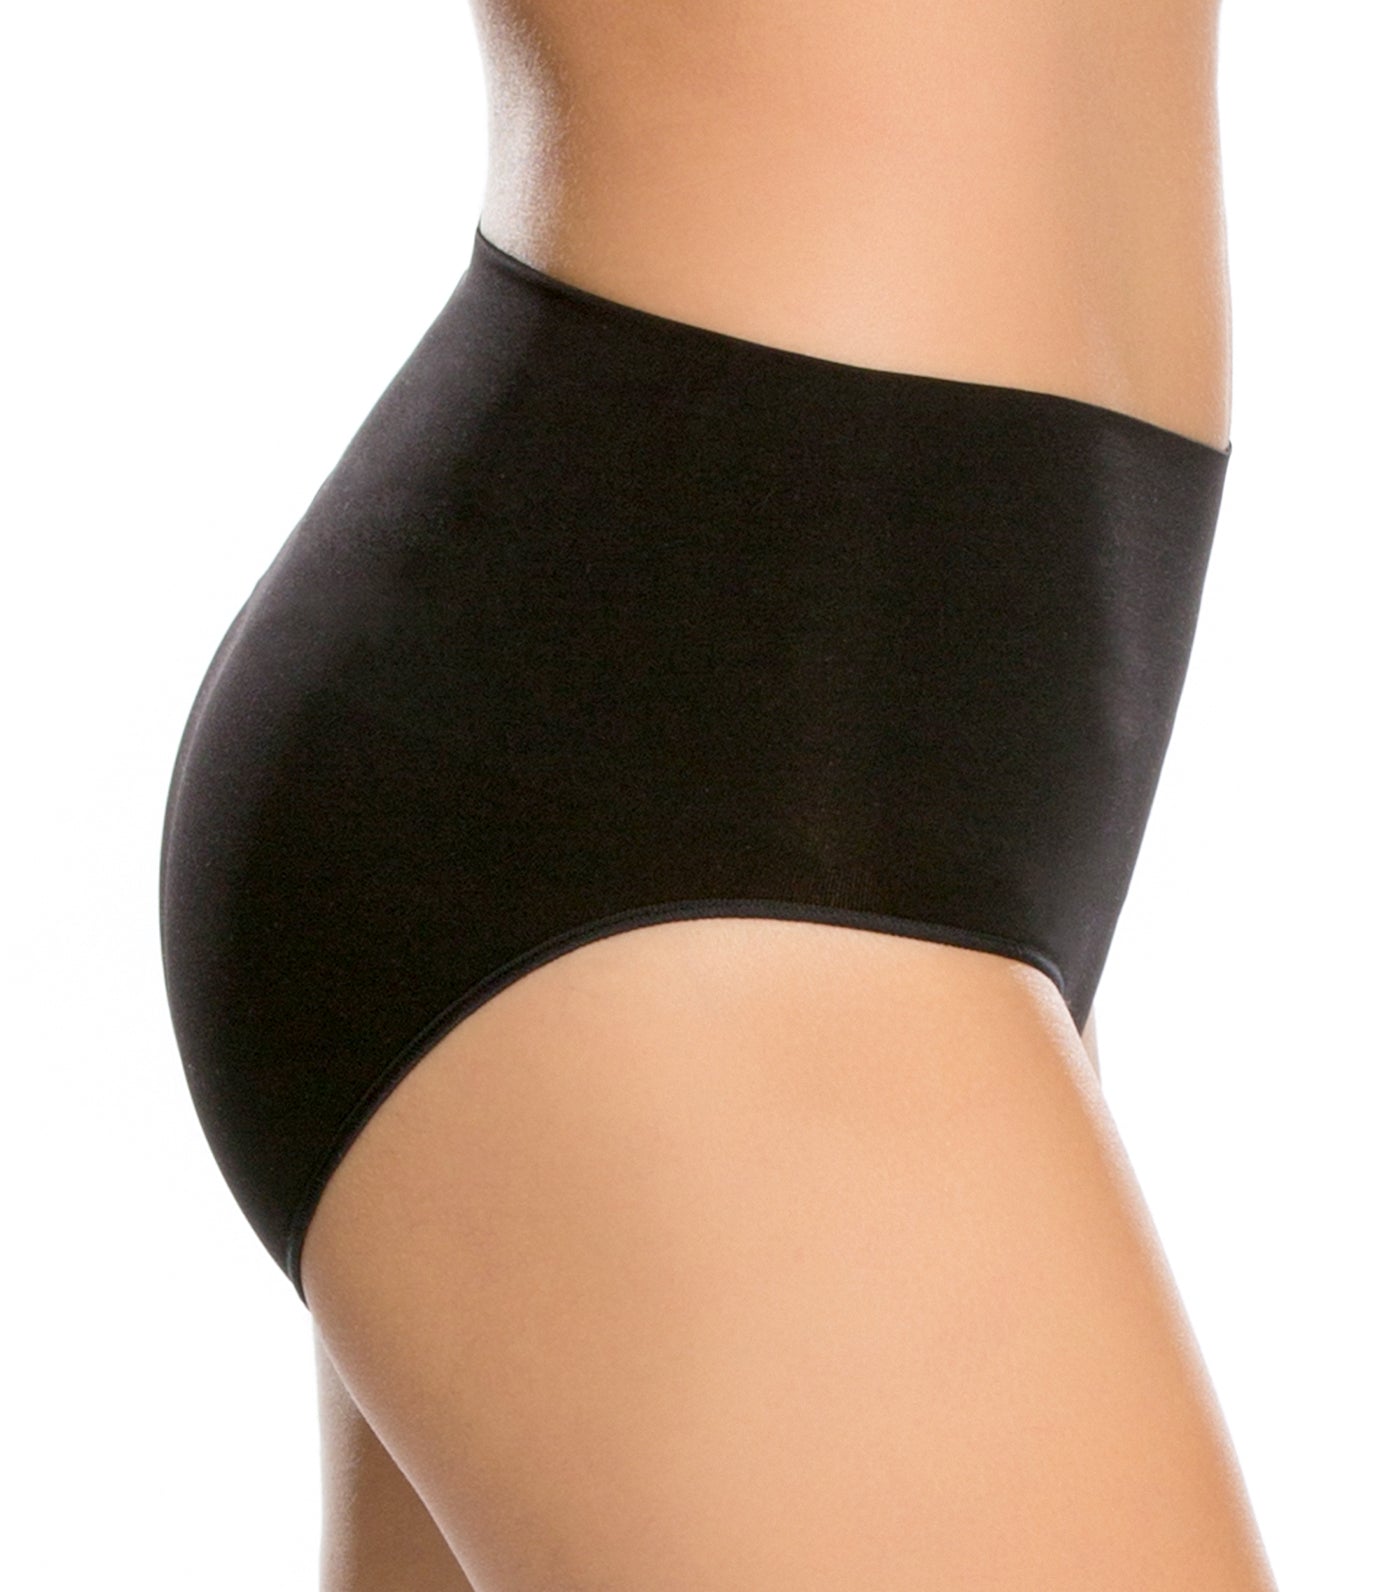 SPANX Everyday Shaping Panty in Black